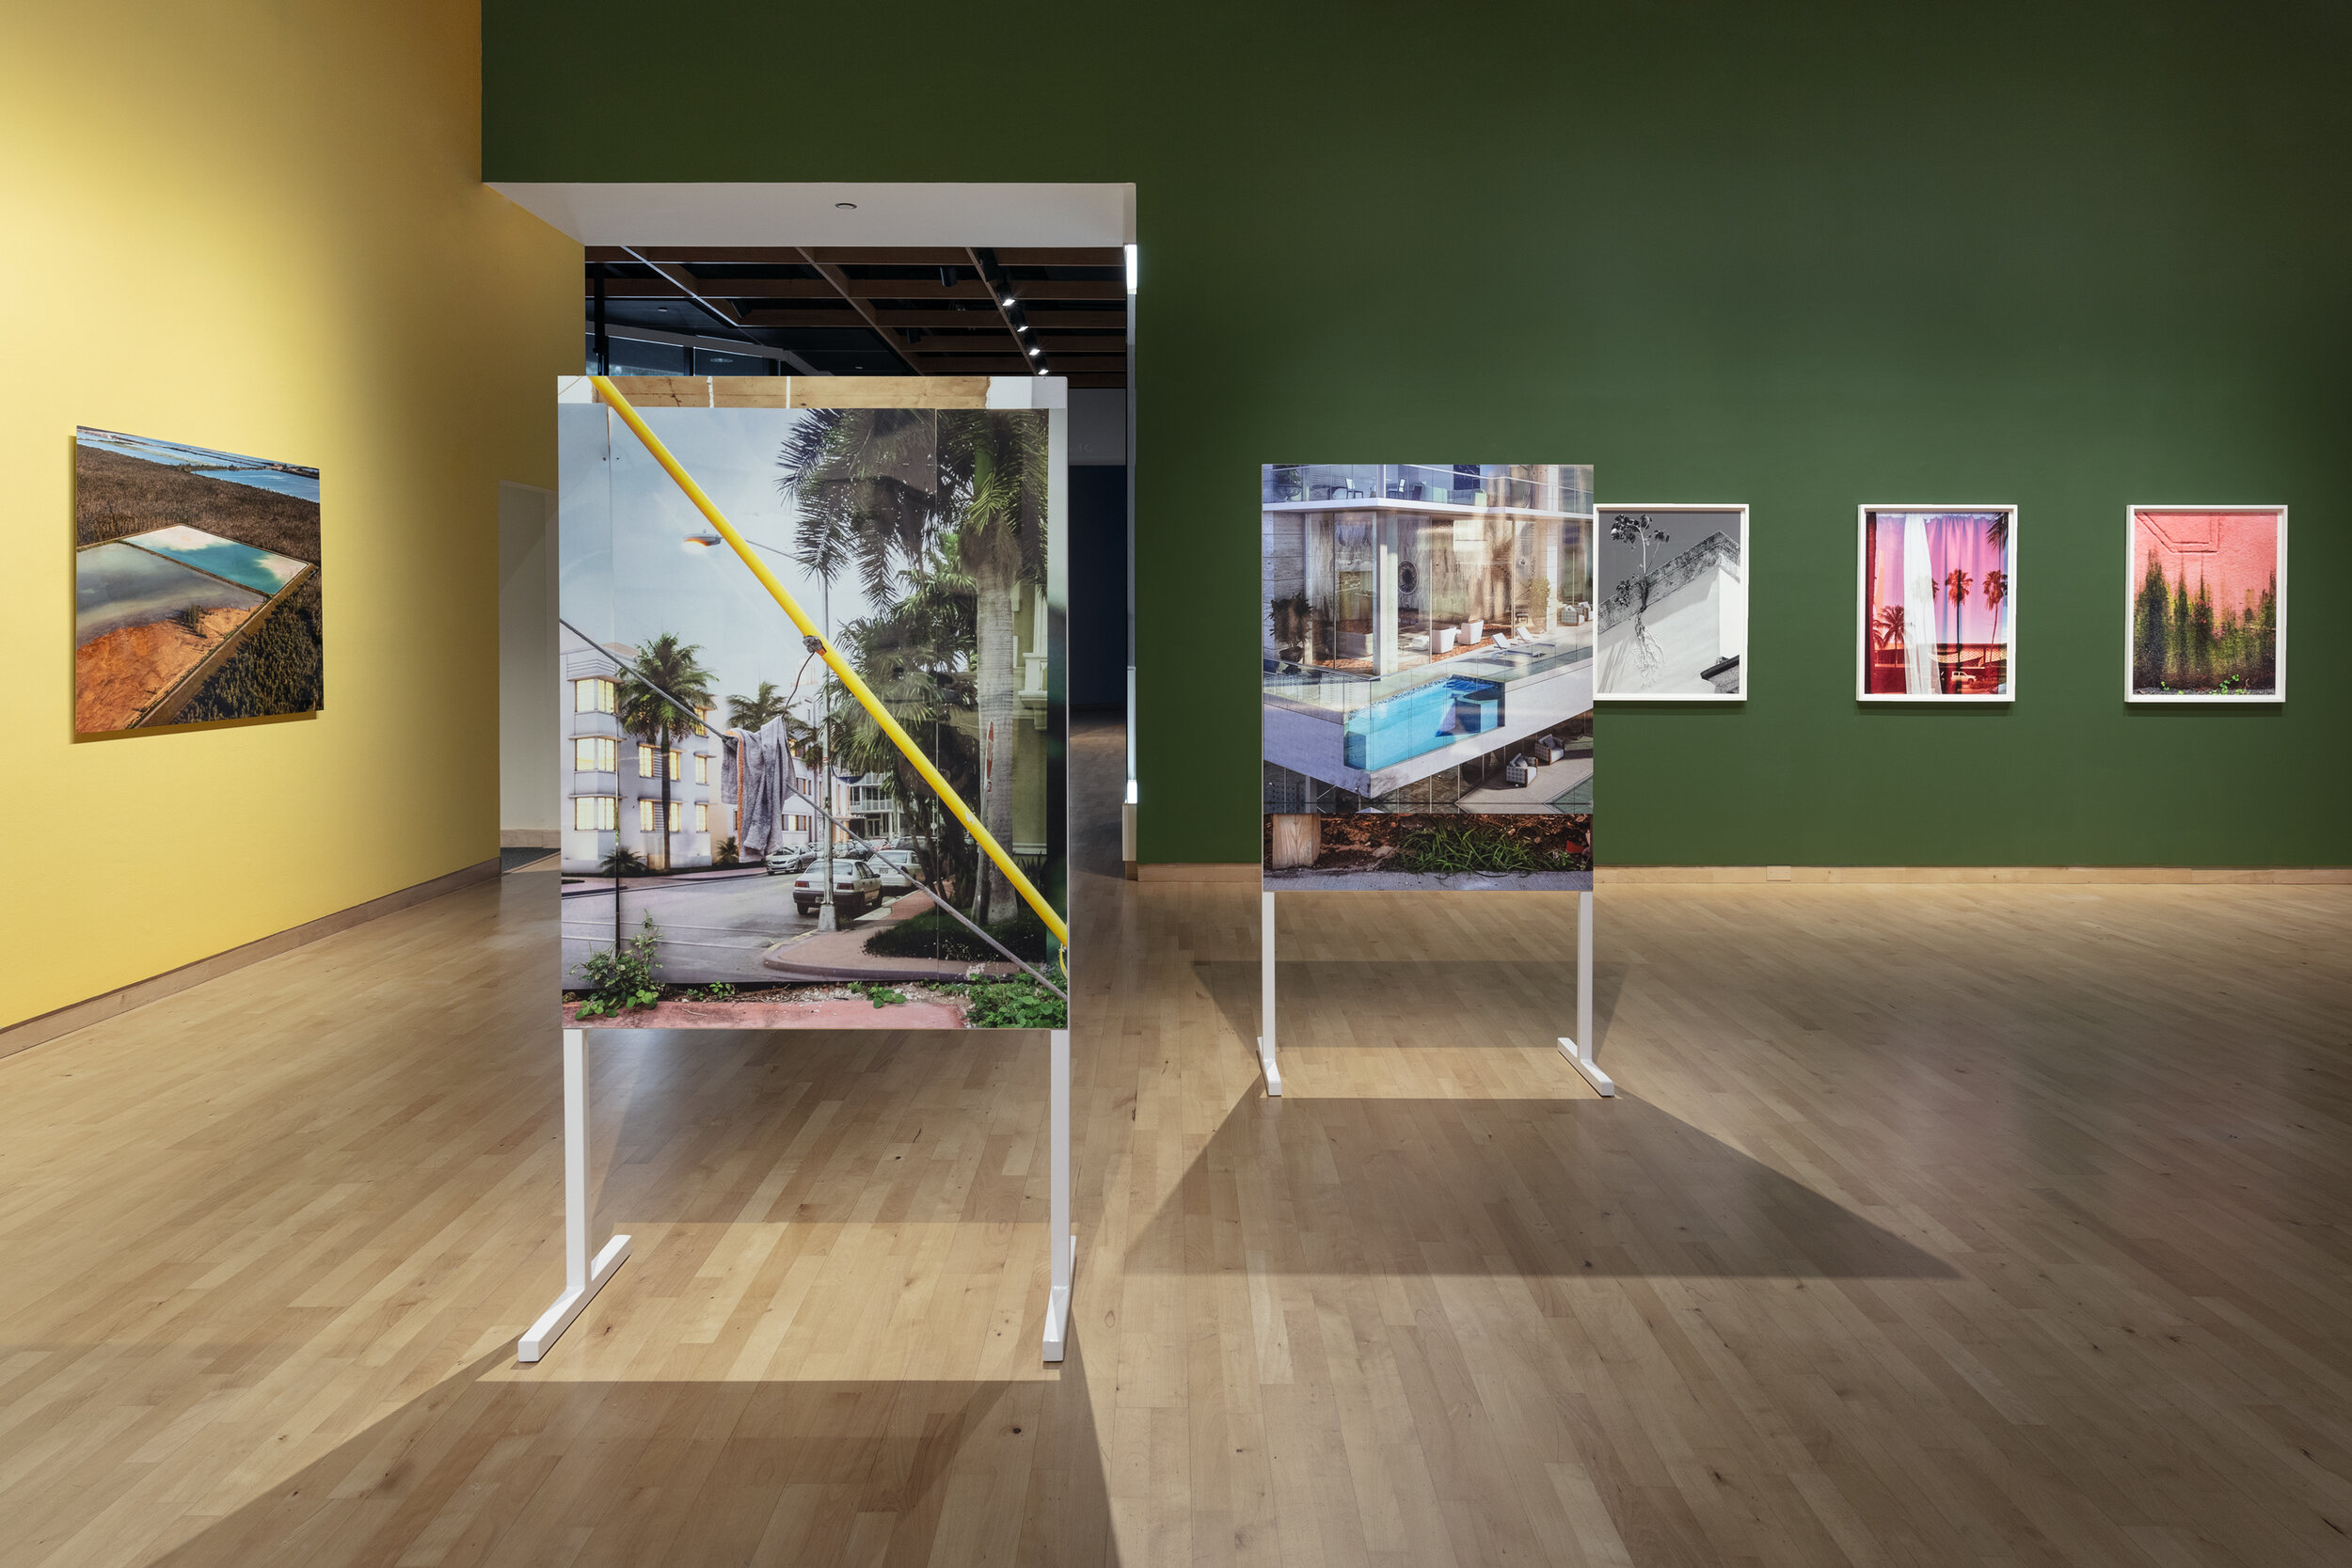   Installation view of FloodZone at the Contemporary Art Museum at USF Tampa, 2020  